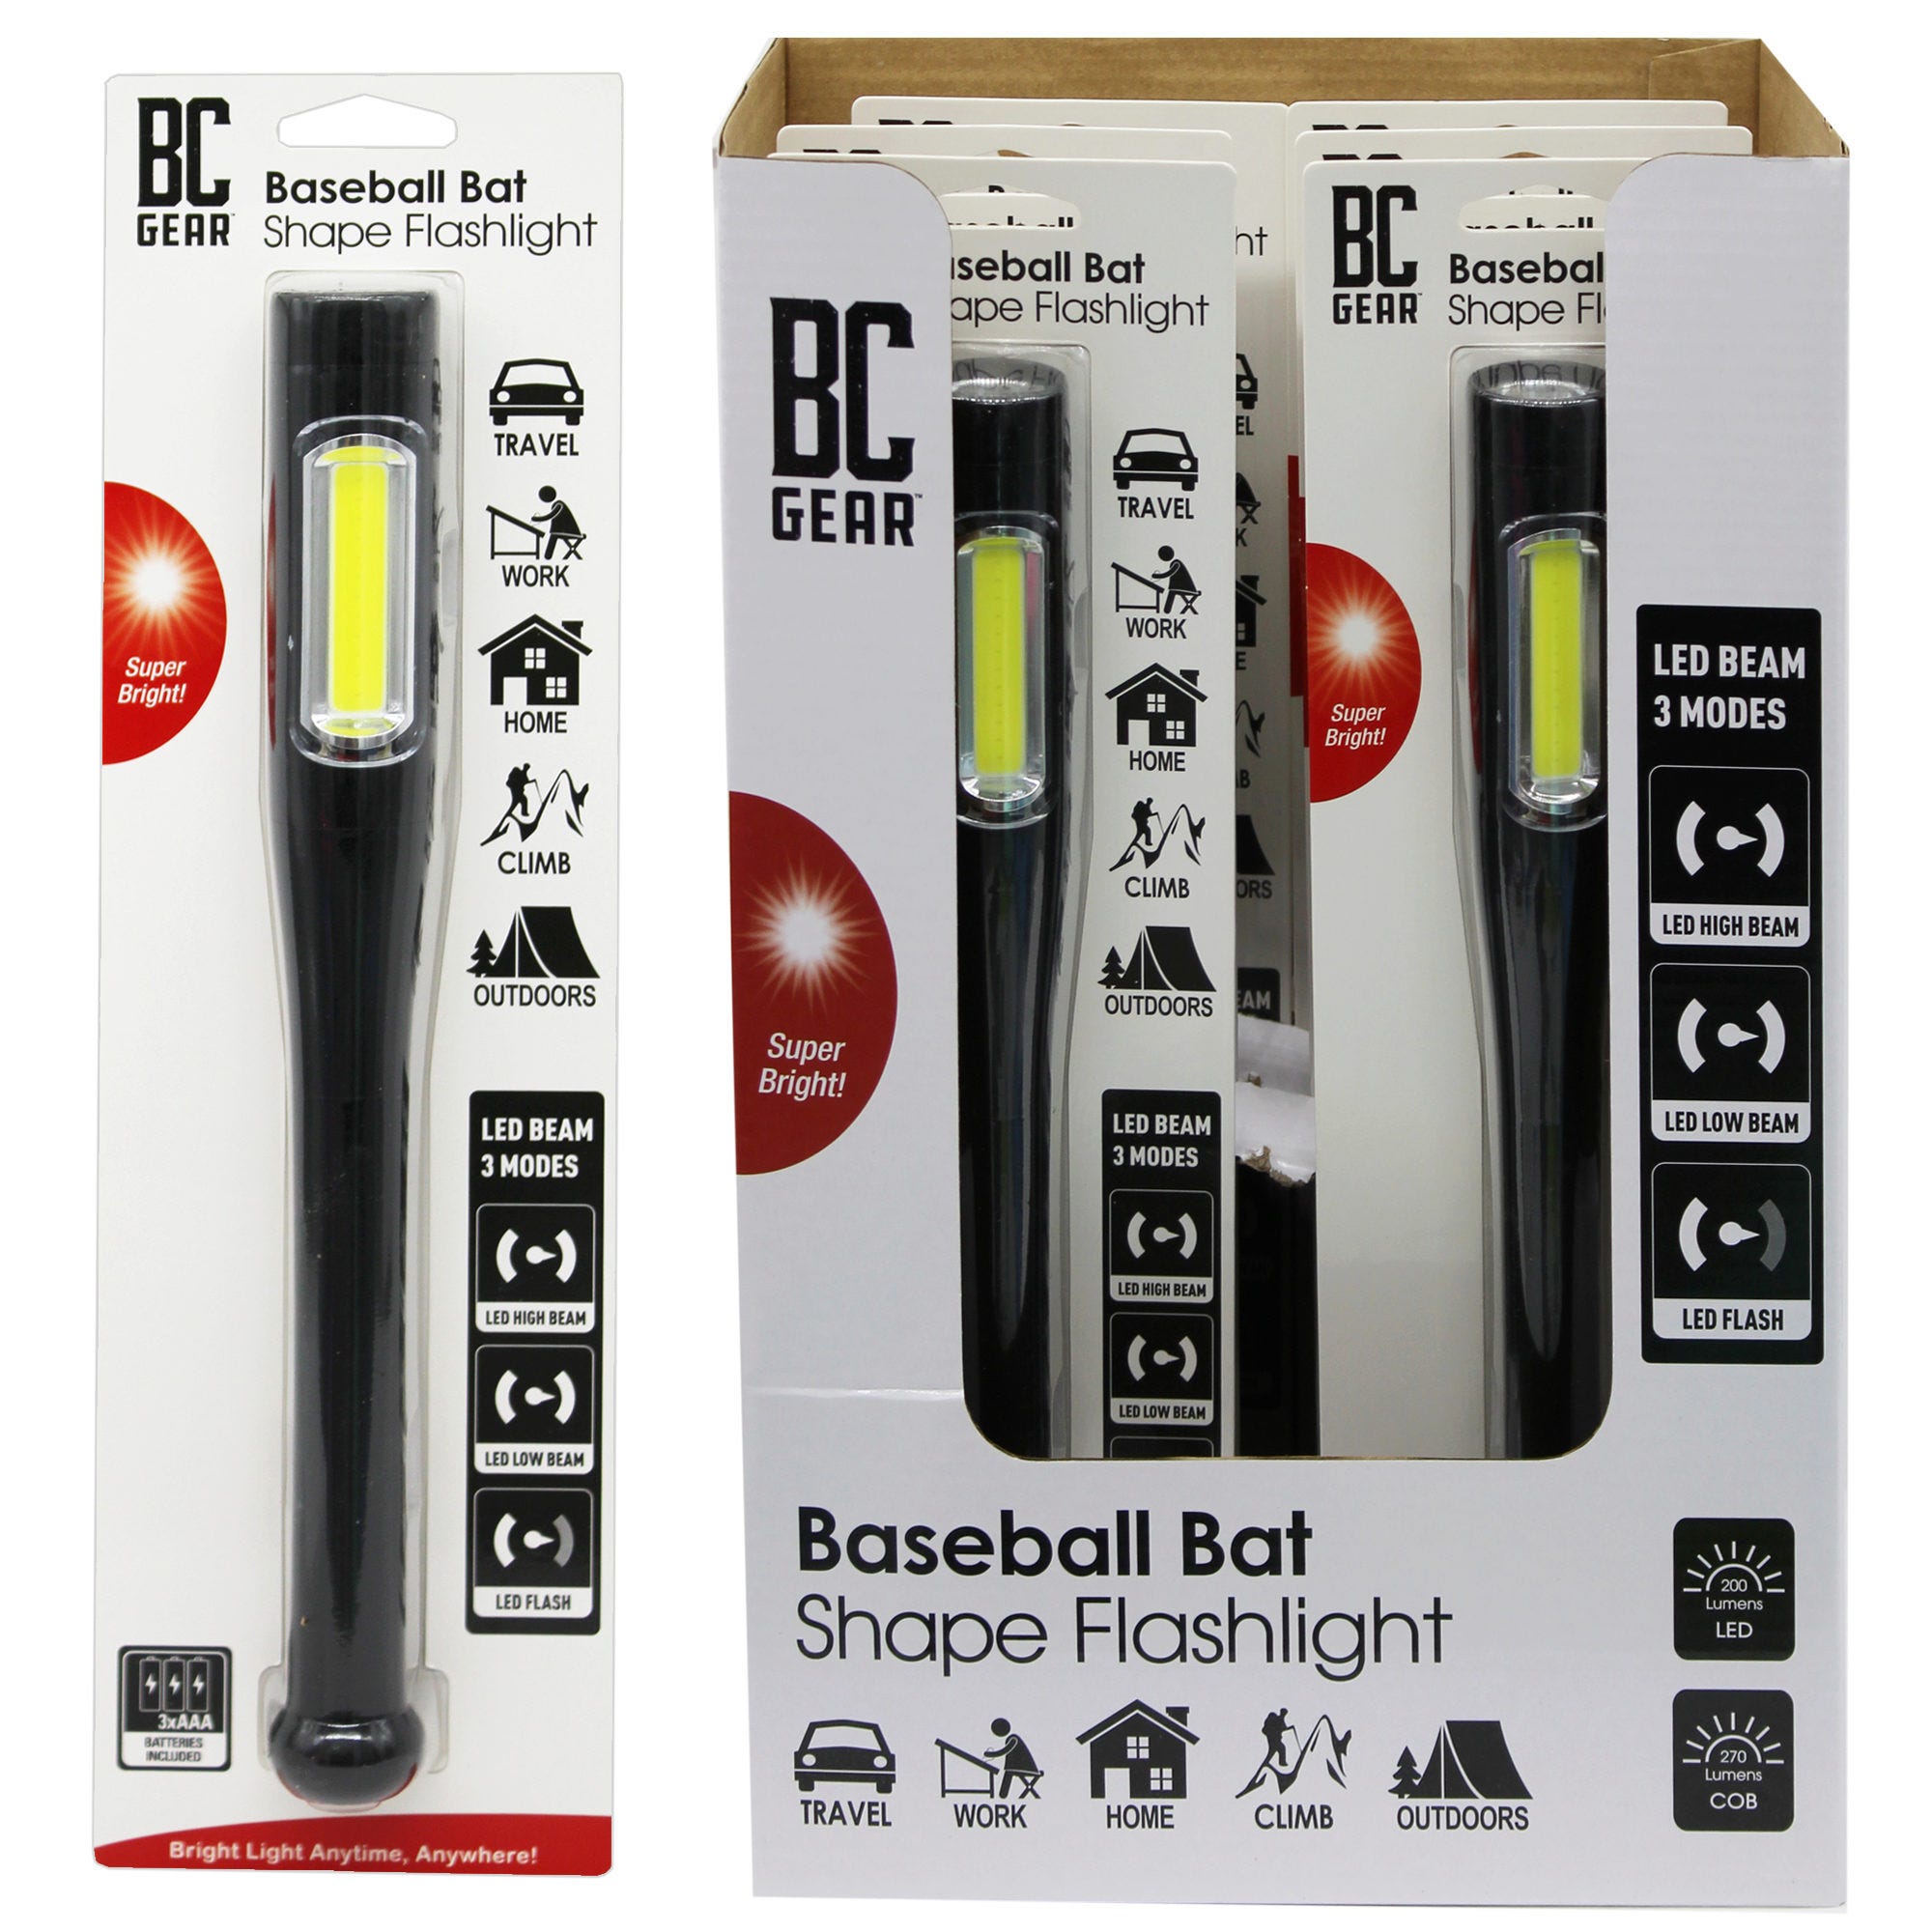 BC Gear 200 Lumen Baseball Bat Shape LED Flashlight with BATTERIES Included in Display - Qty 6